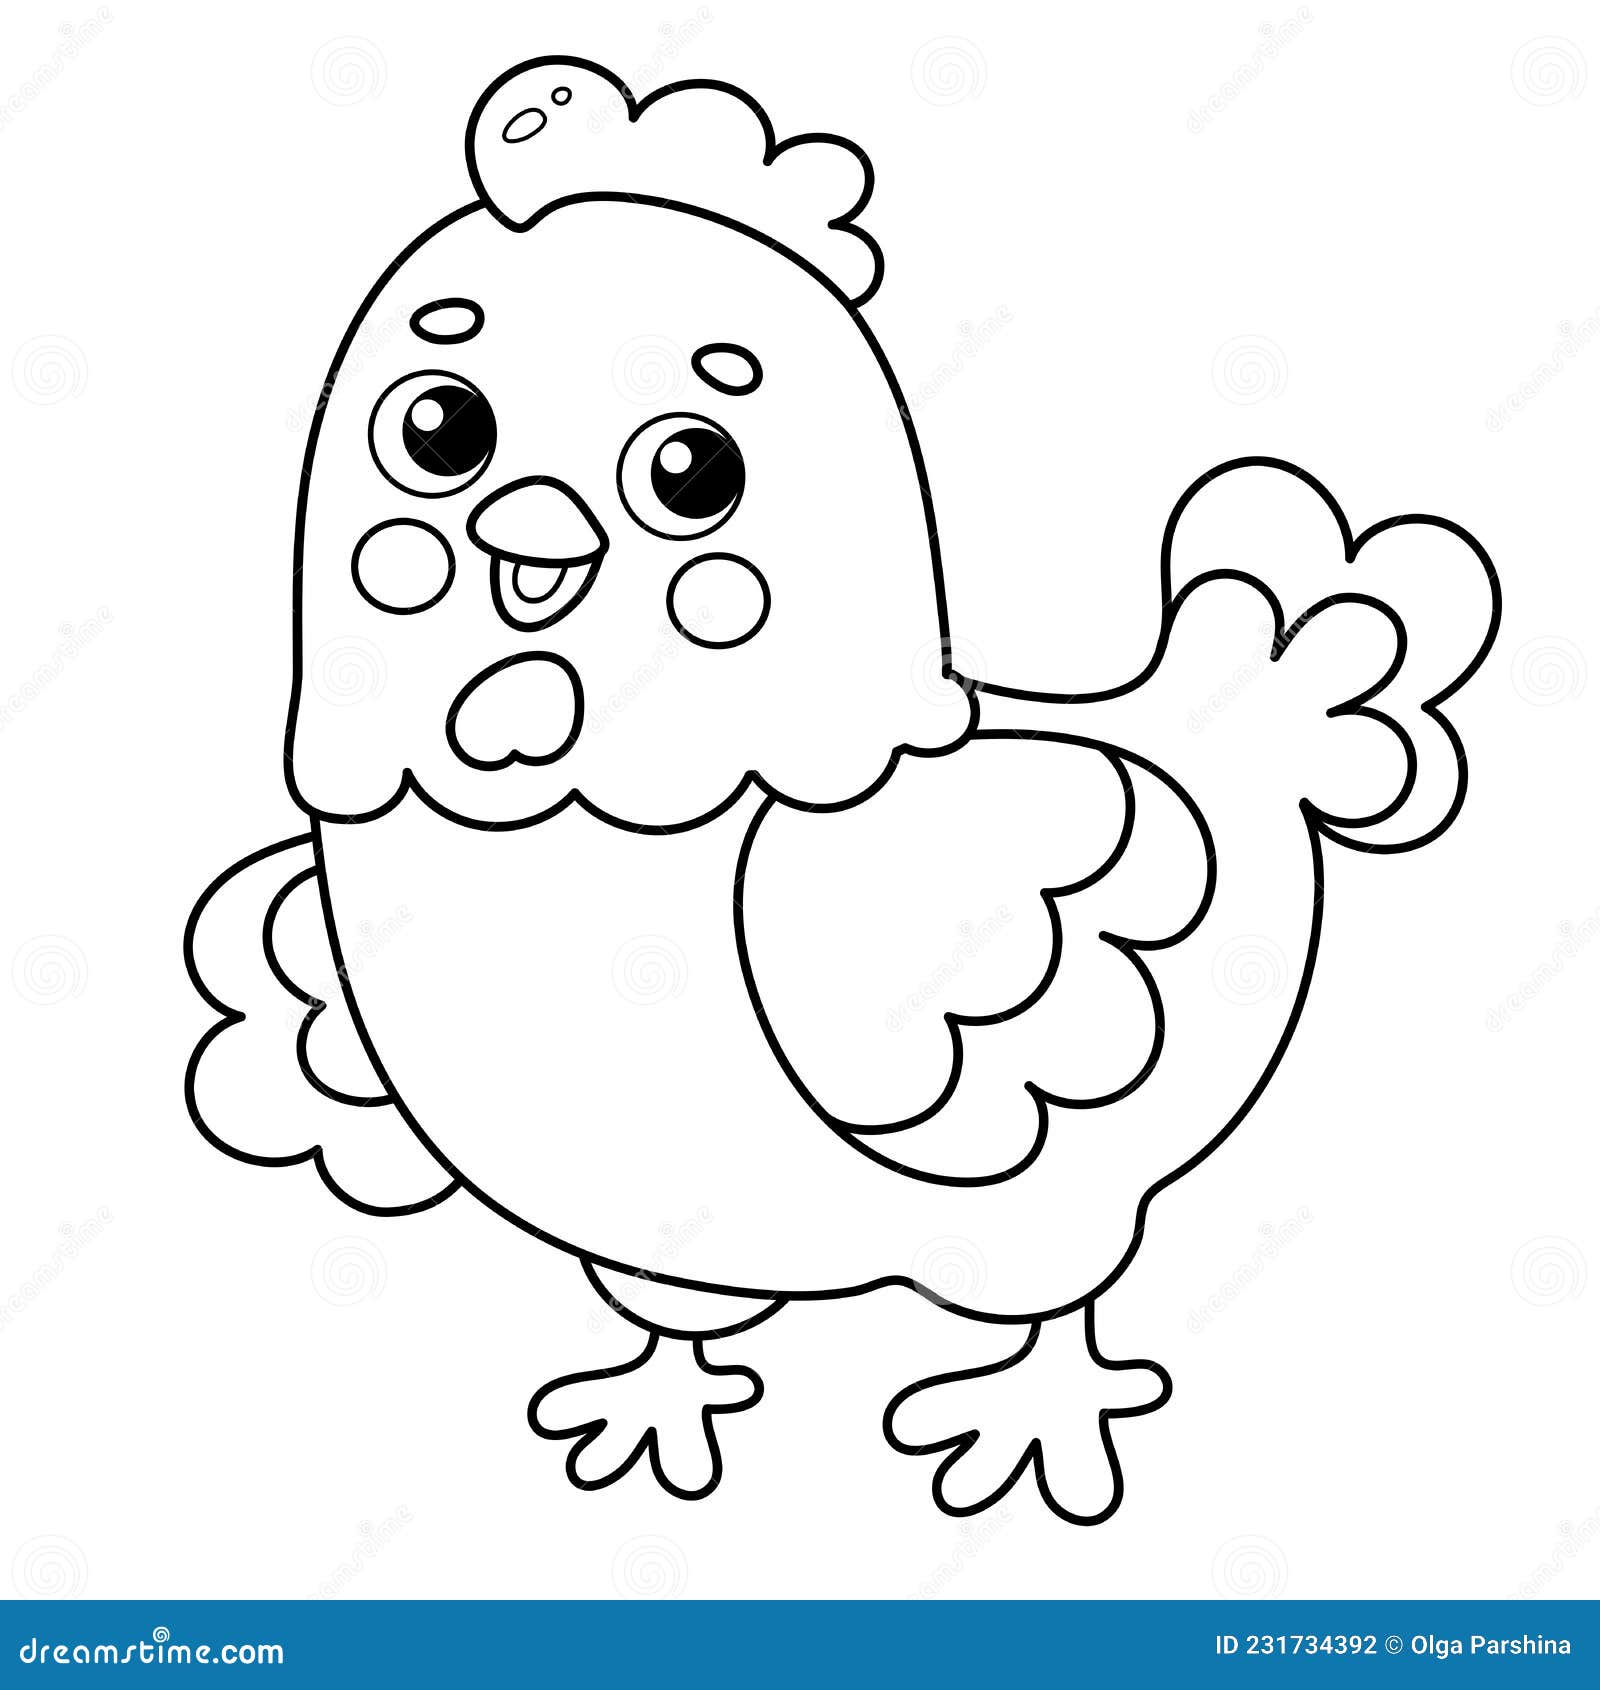 Coloring page outline of cartoon chicken or hen farm animals stock vector